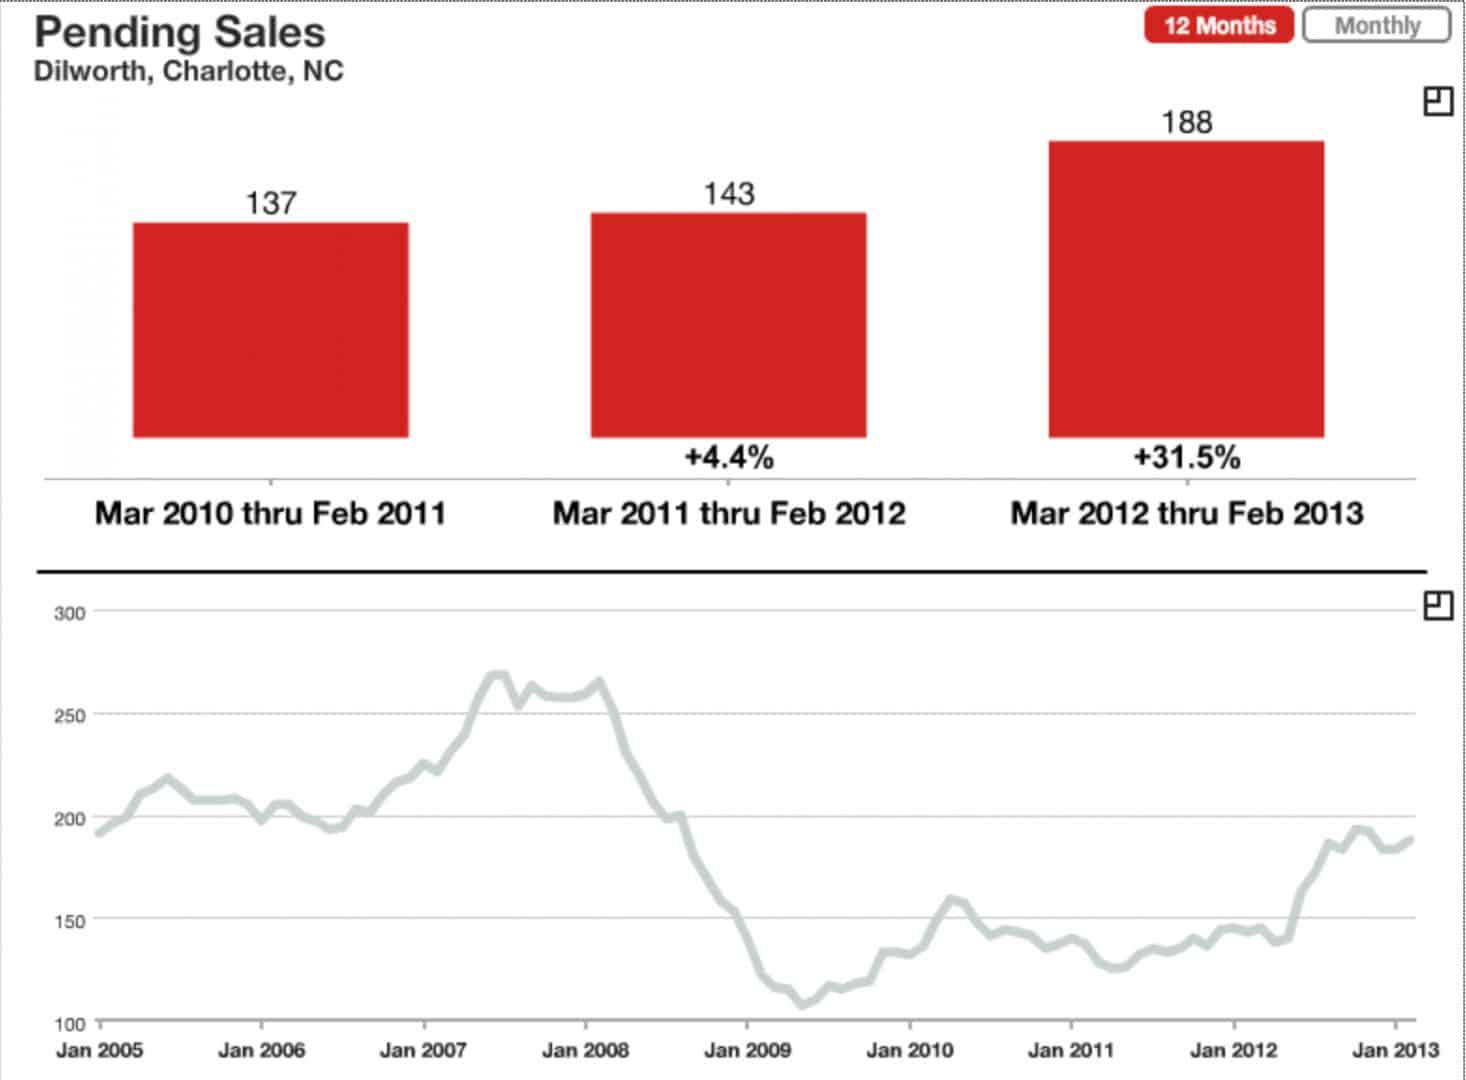 Dilworth Charlotte Pending Home Sales March 2013